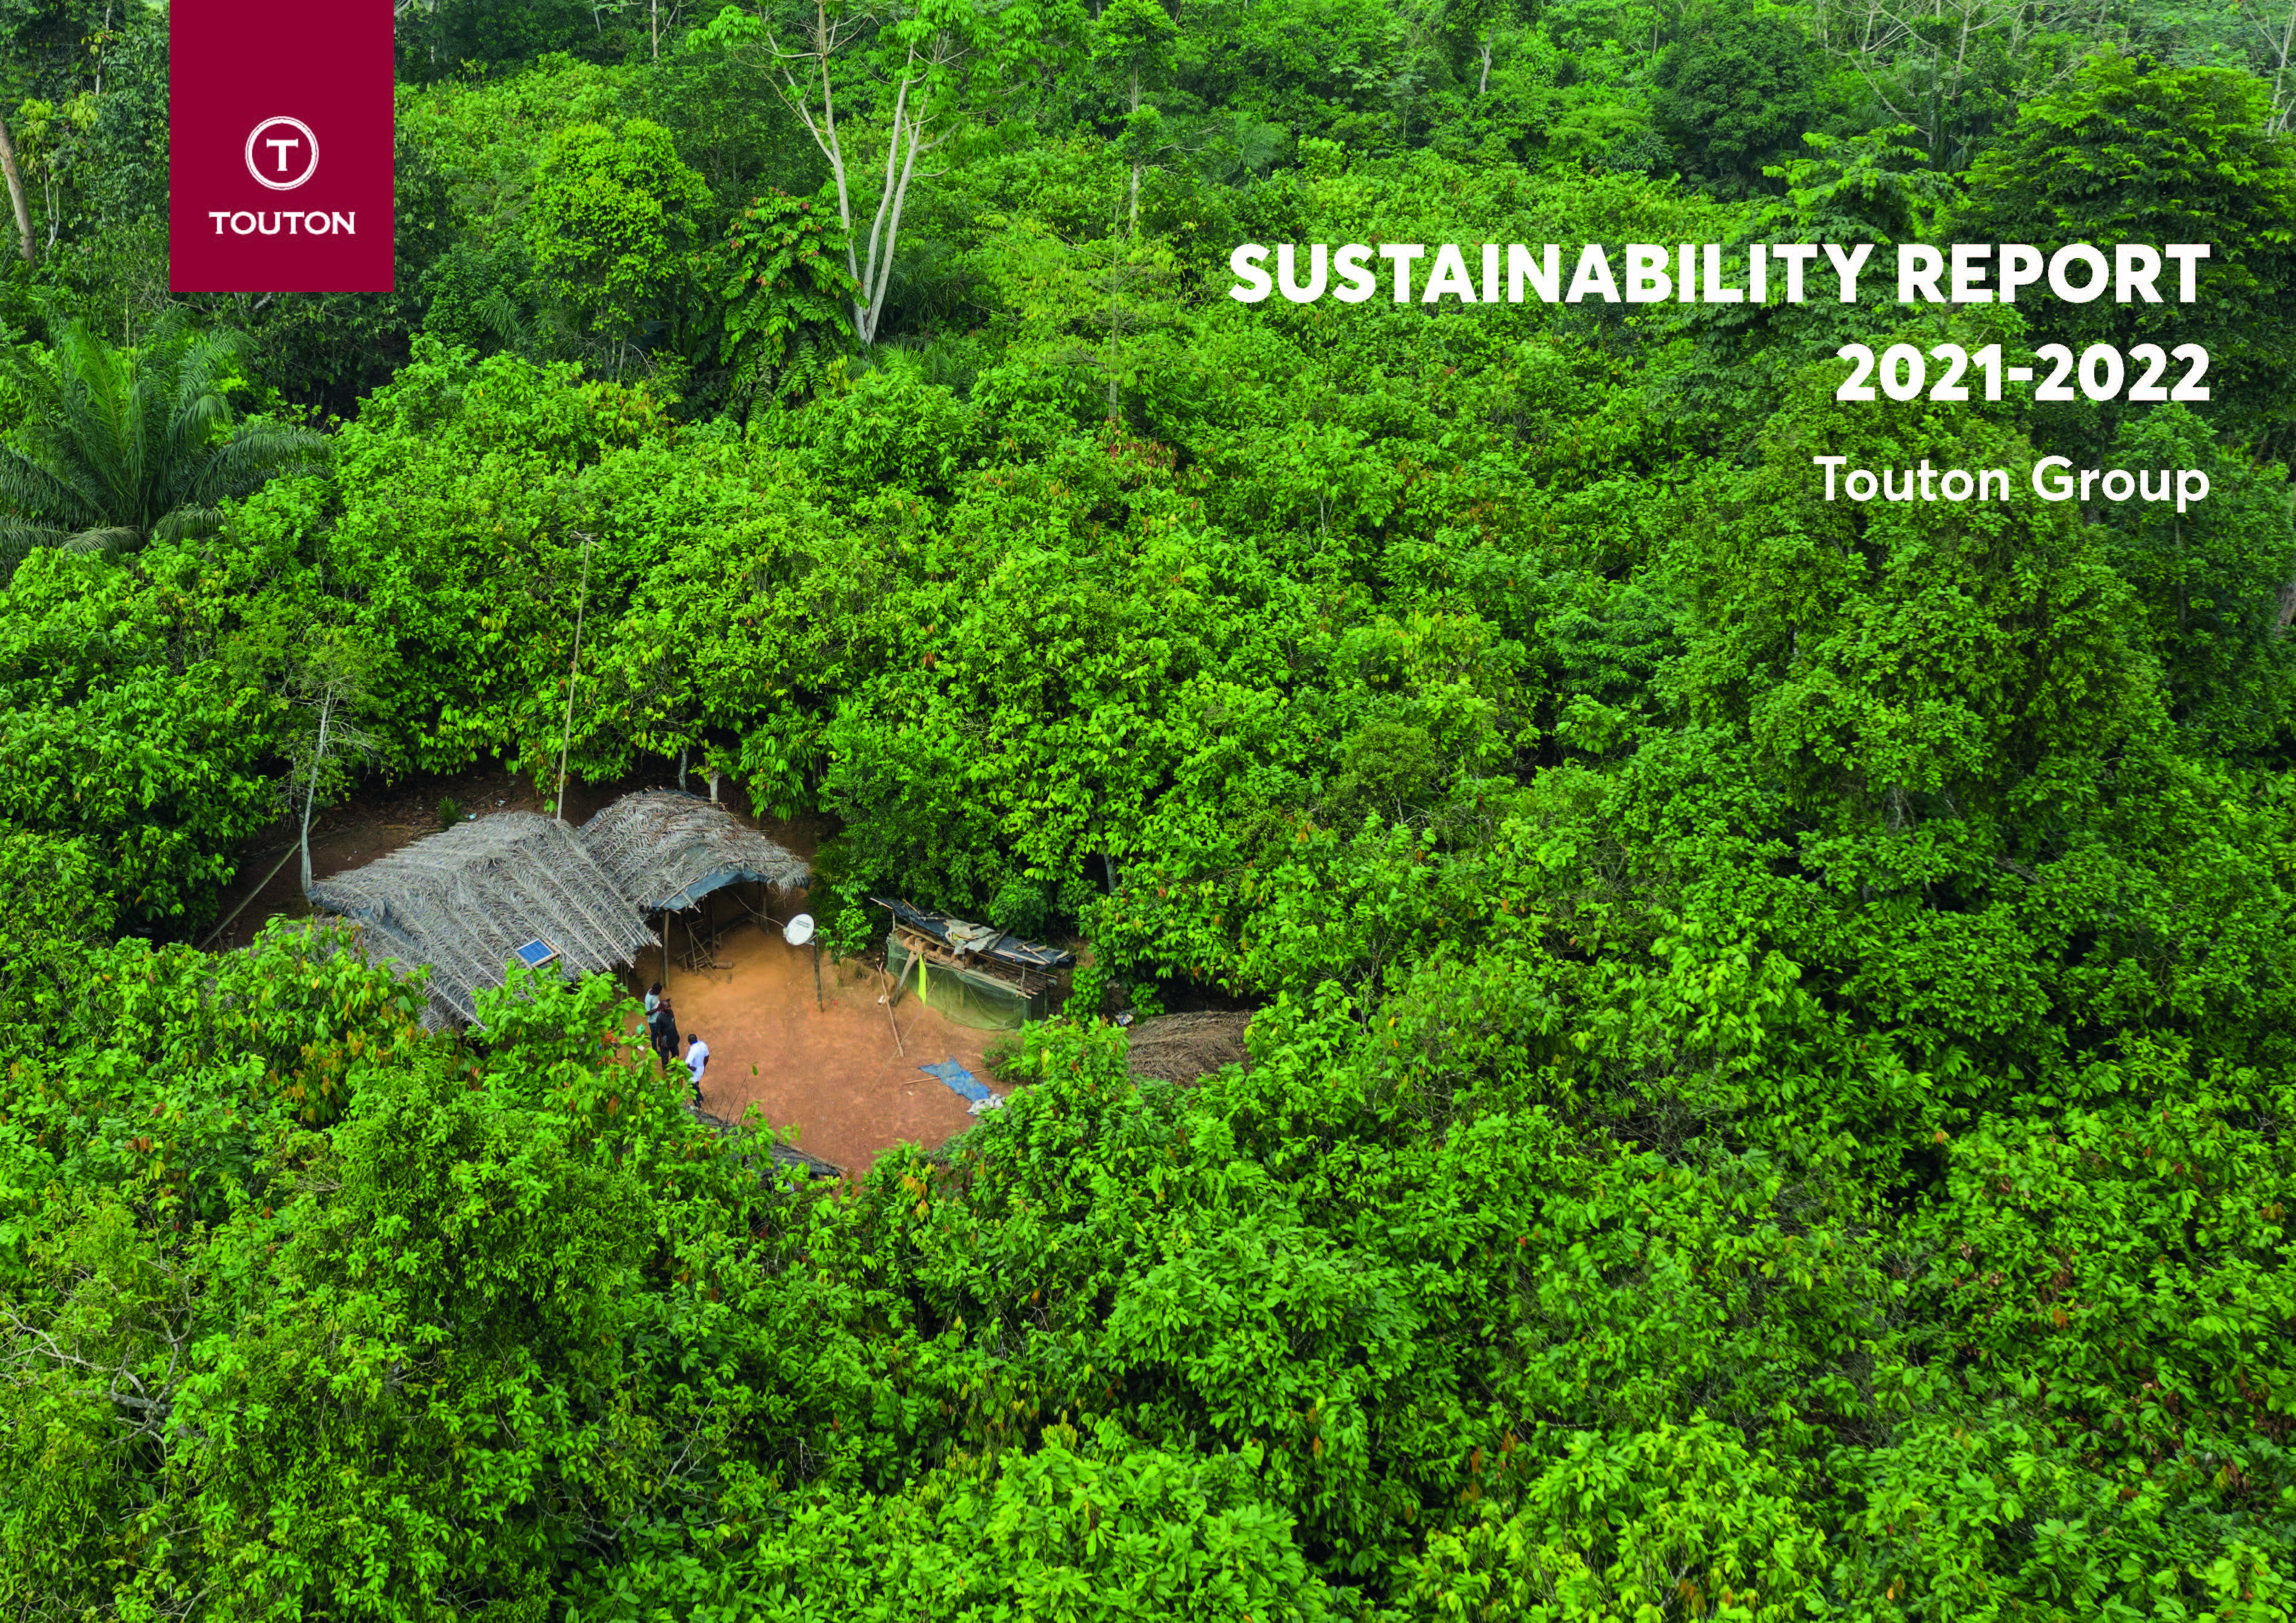 We are proud to release our Sustainability report 2021-2022!